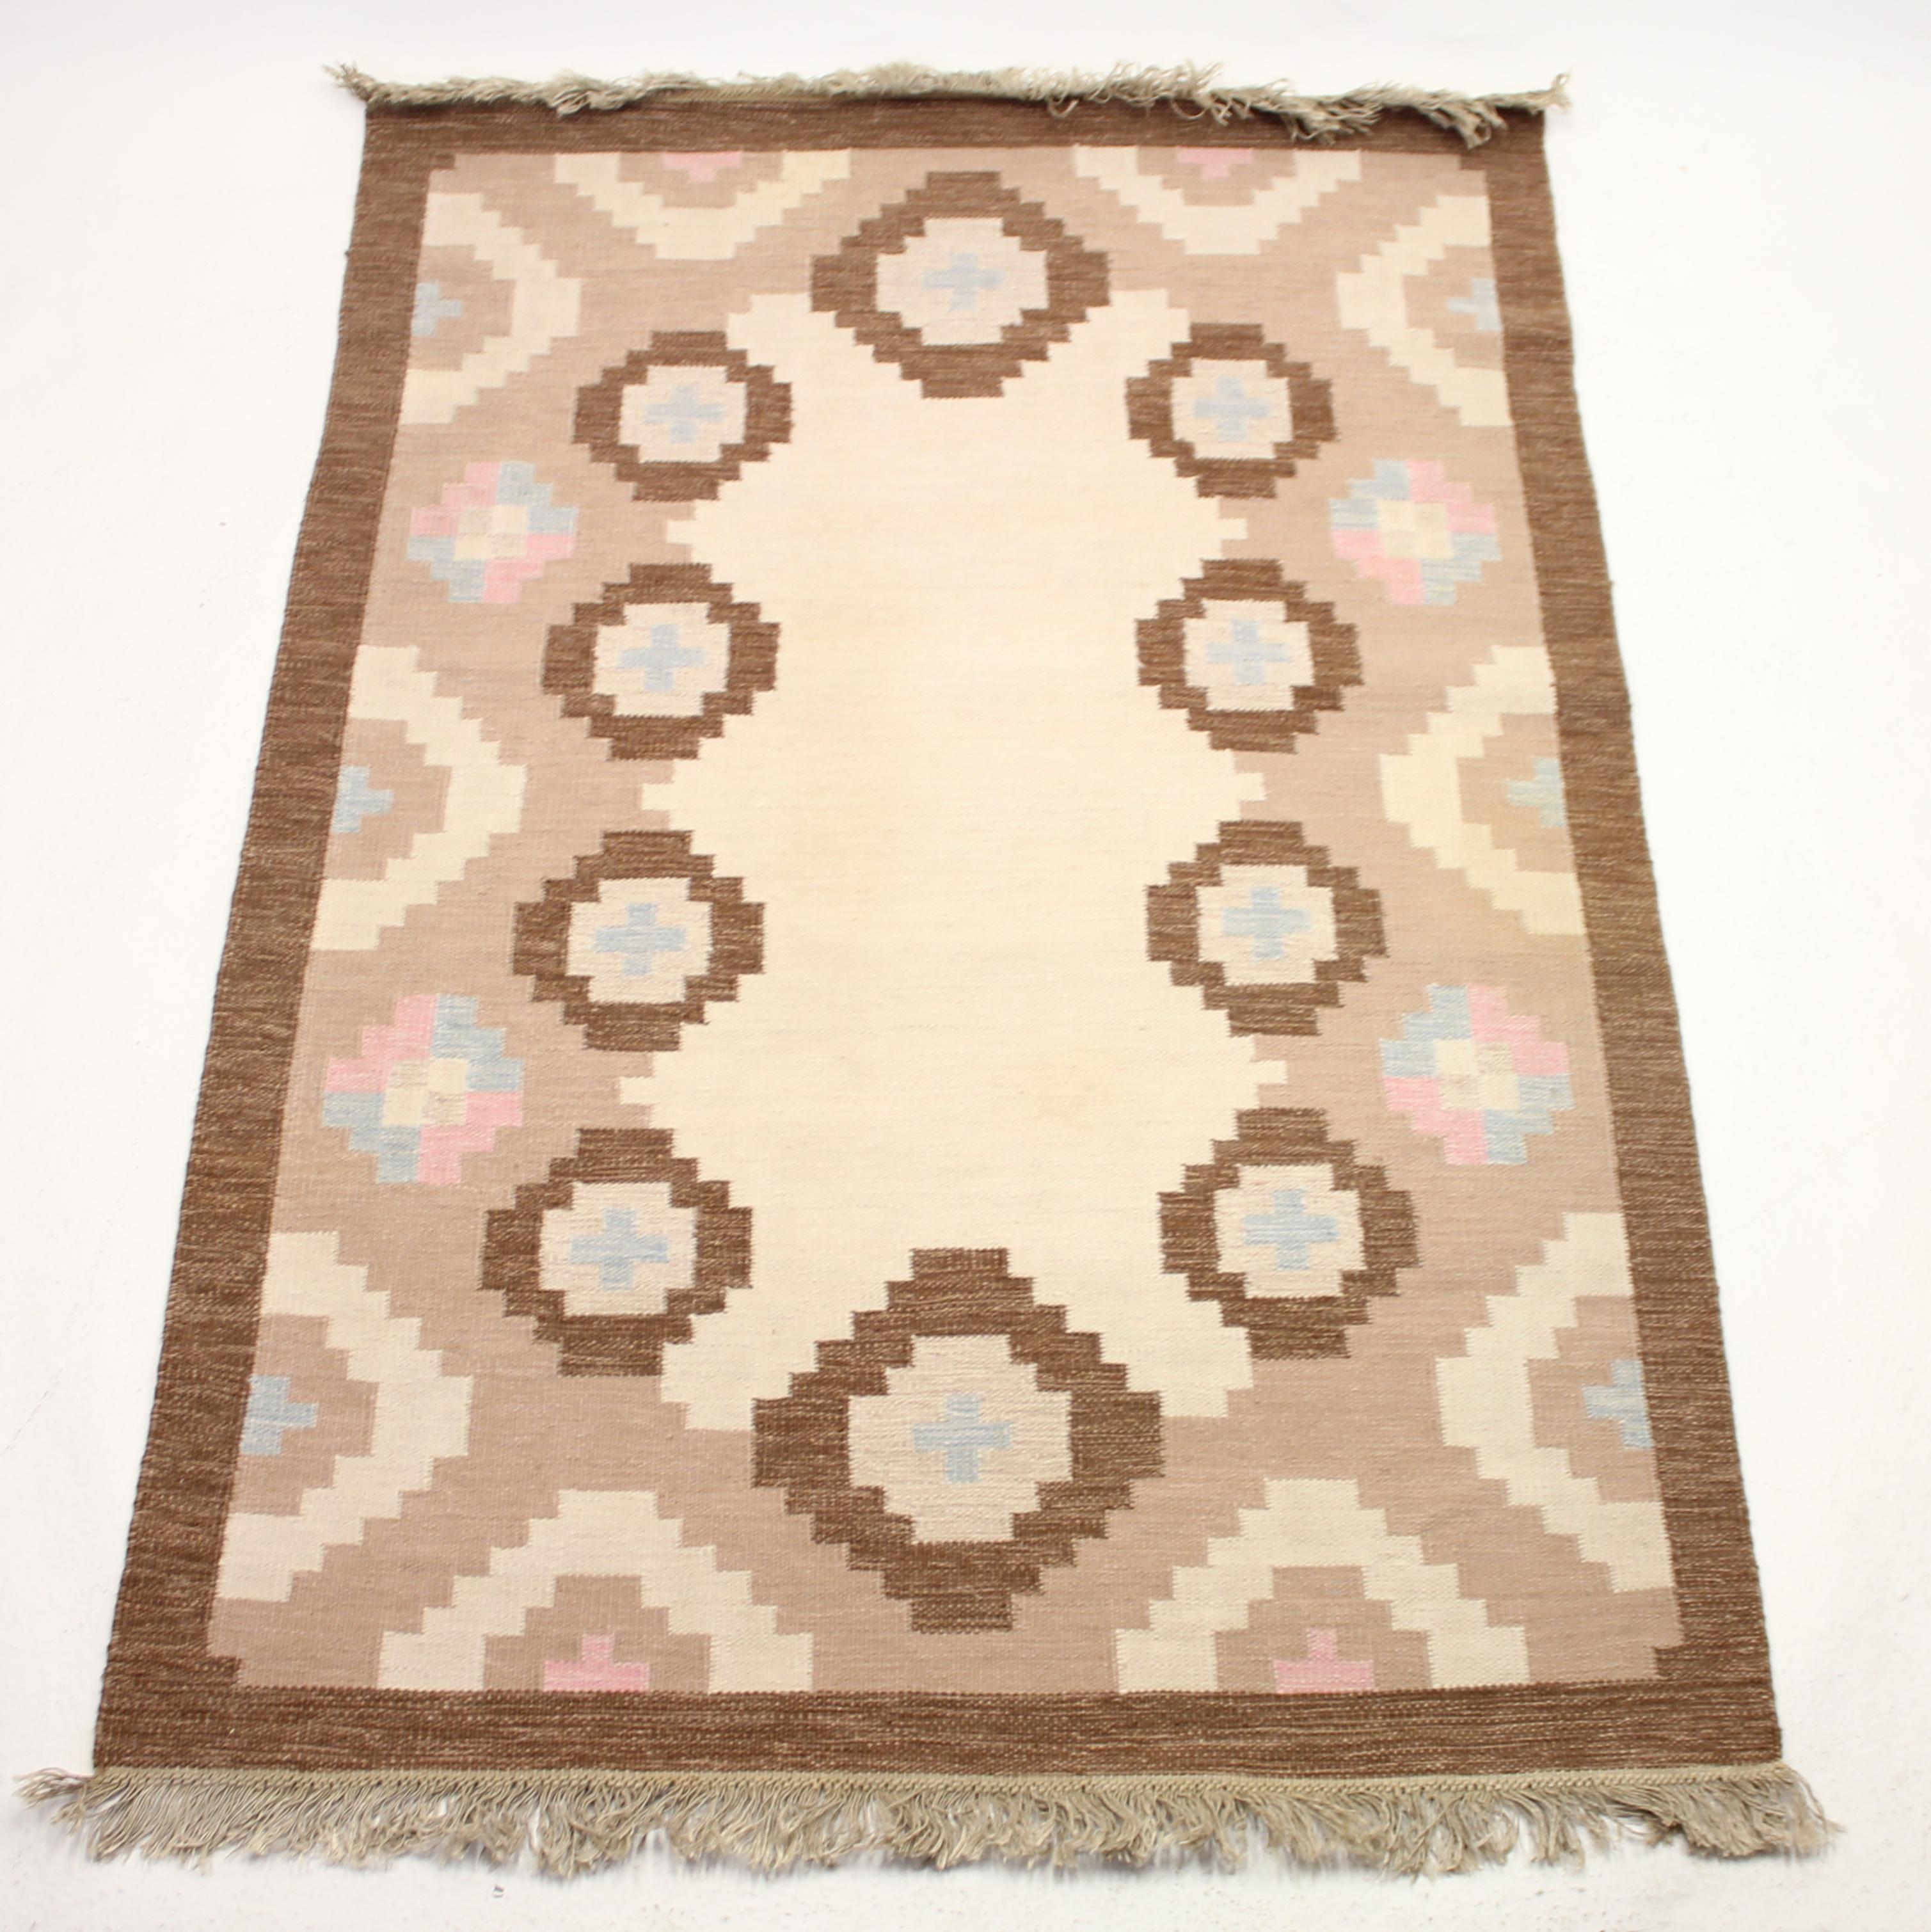 Swedish flat weave Röllakan carpet from the 1950s by unknown designer. Main colour is brown in a few different tones with a variety of patterns and shapes in beige, blue, pink on a brown/beige bottom/base. Newly cleaned by a professional carpet